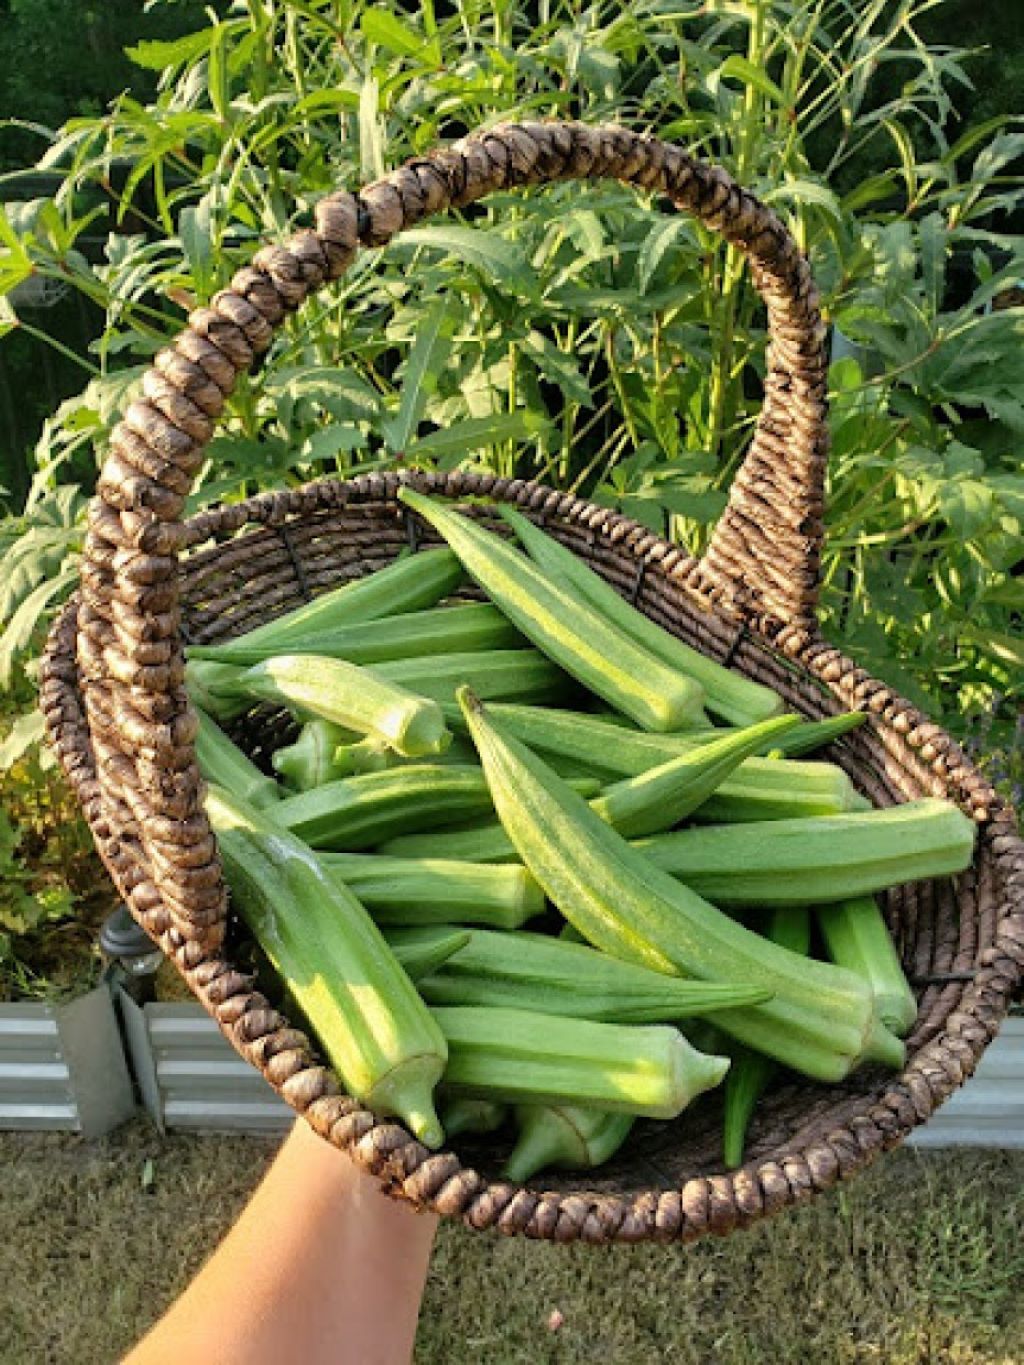 Tips For Serving And Storage: Freeze Breaded Okra